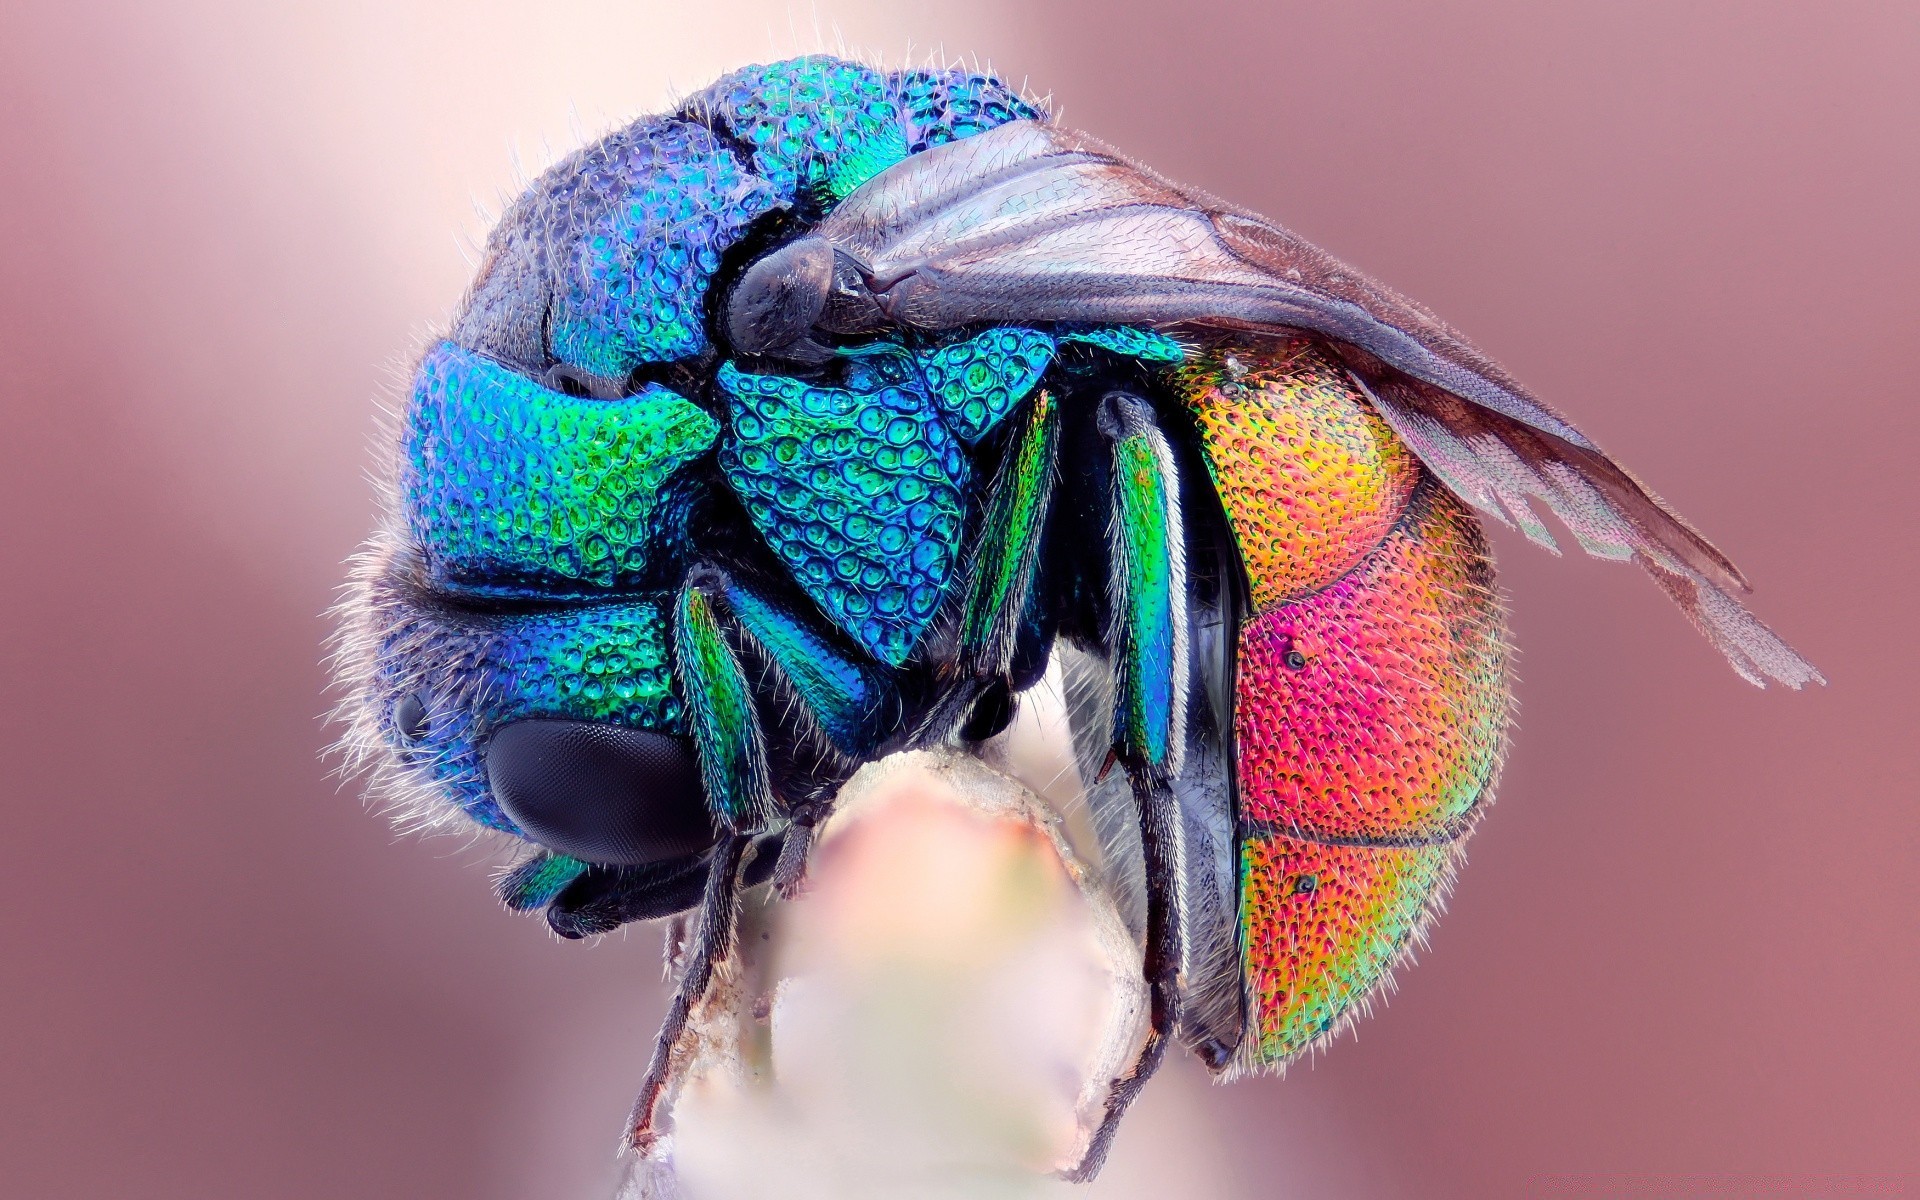 bright colors nature color animal wildlife insect wing beautiful fly close-up portrait